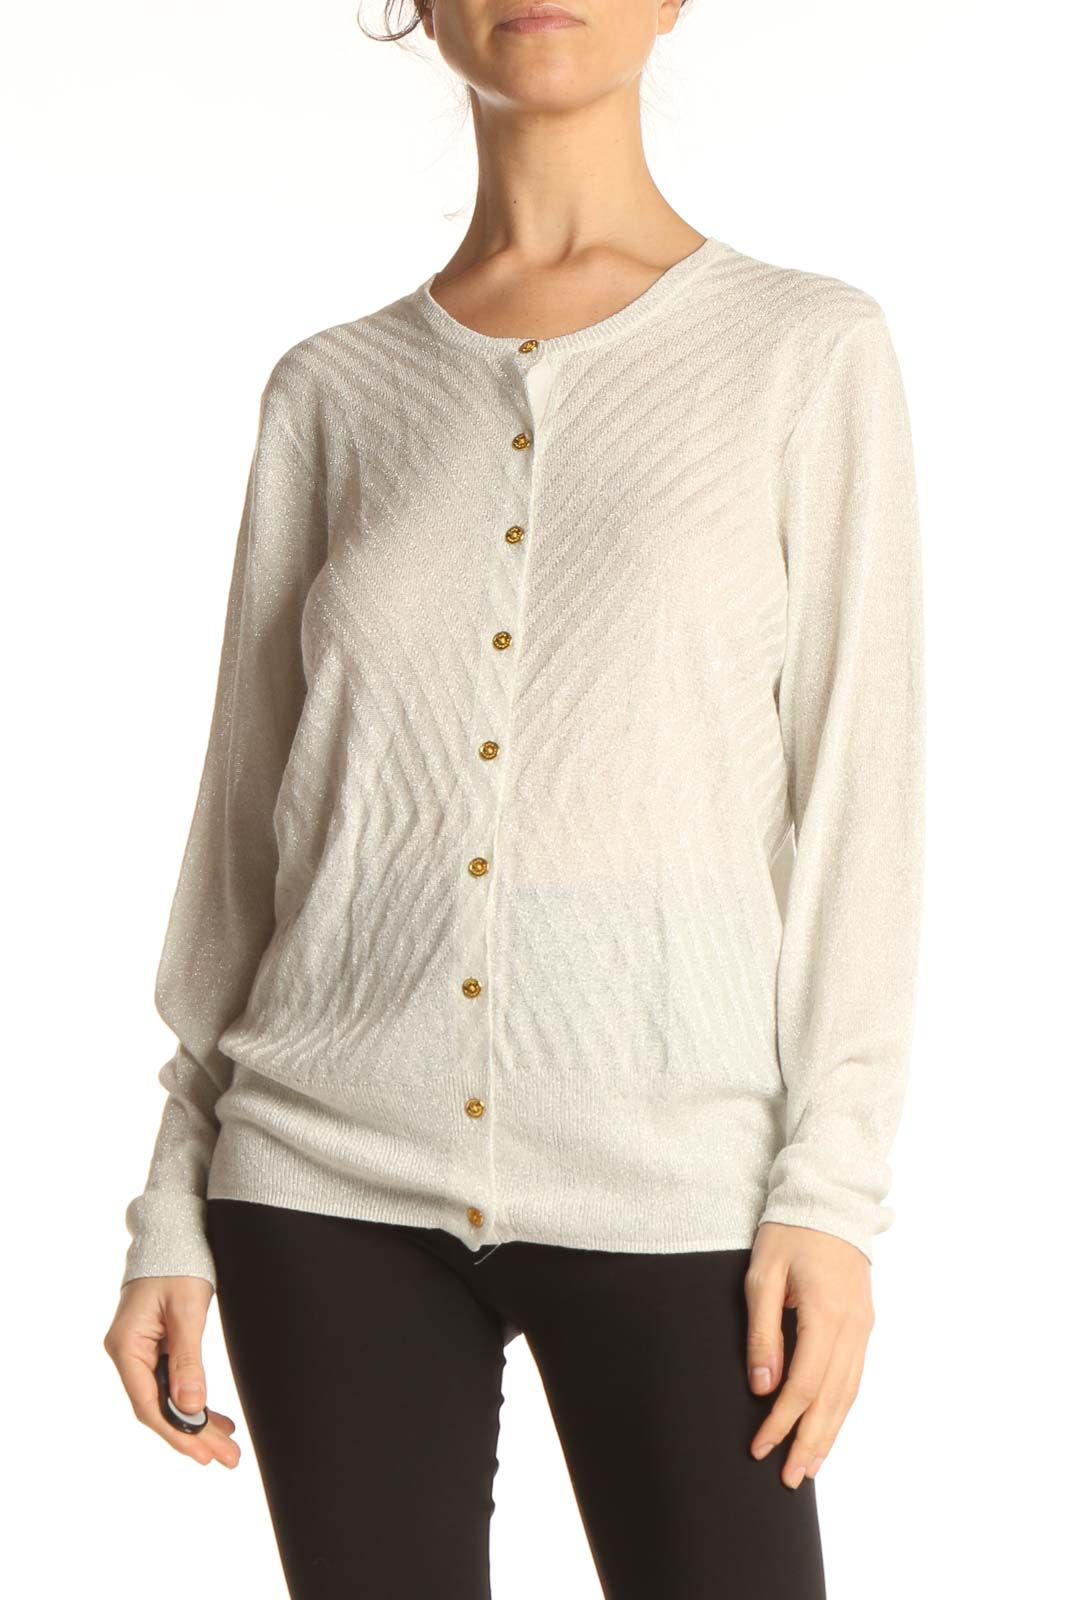 Beige Textured All Day Wear Sweater Front